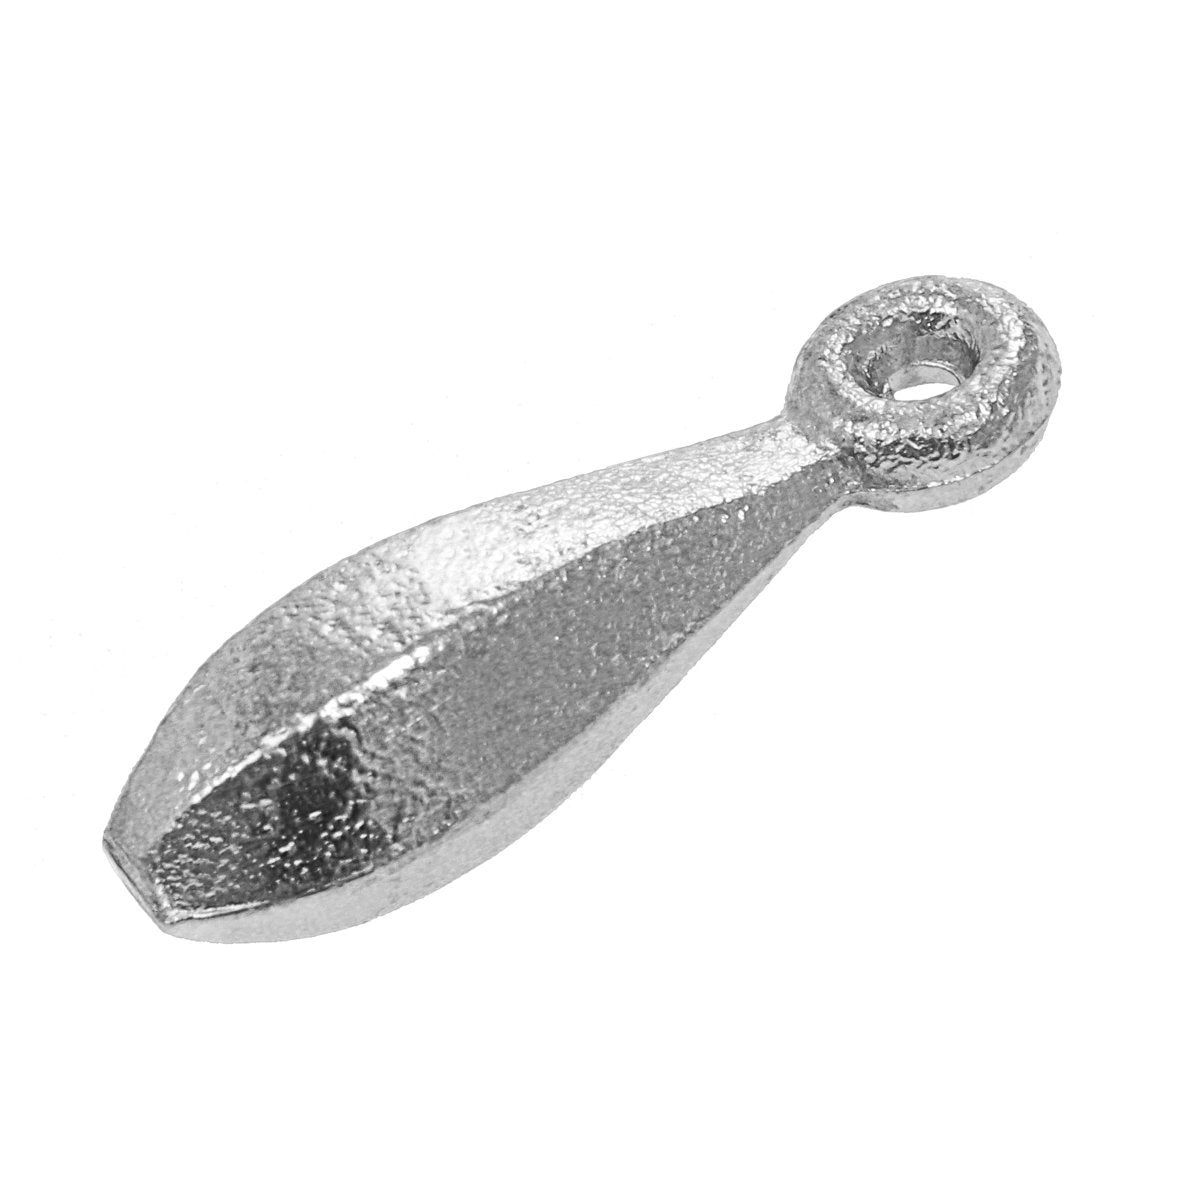 Pin Lead Sinker for Fishing, Freshwater and Saltwater Fishing